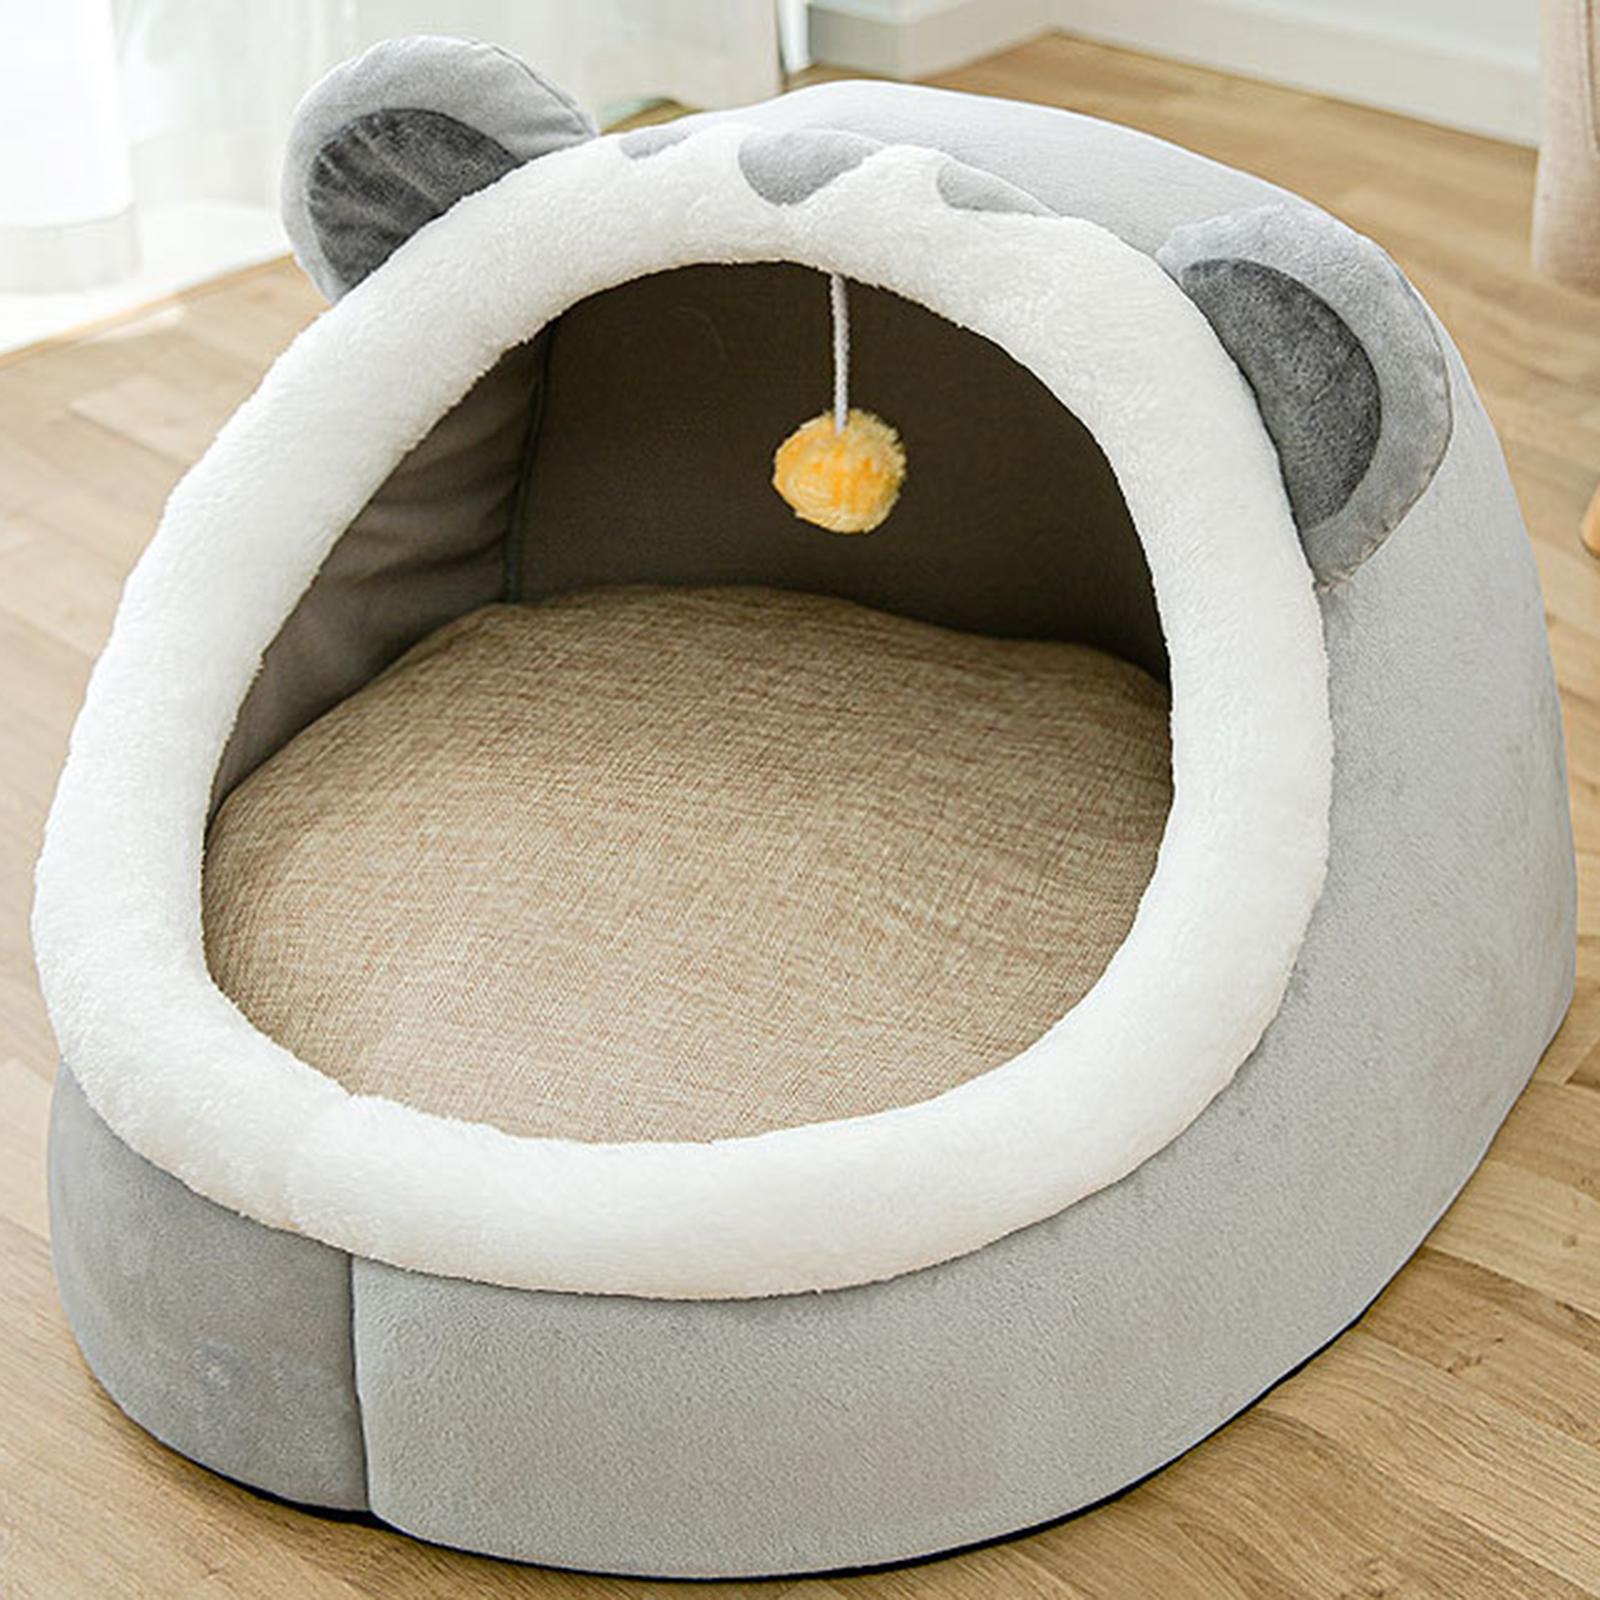 Cute Pet Bed Cat Dog Nest Bed Kennel Warm Comfortable for Kitten Sleeping Gray M